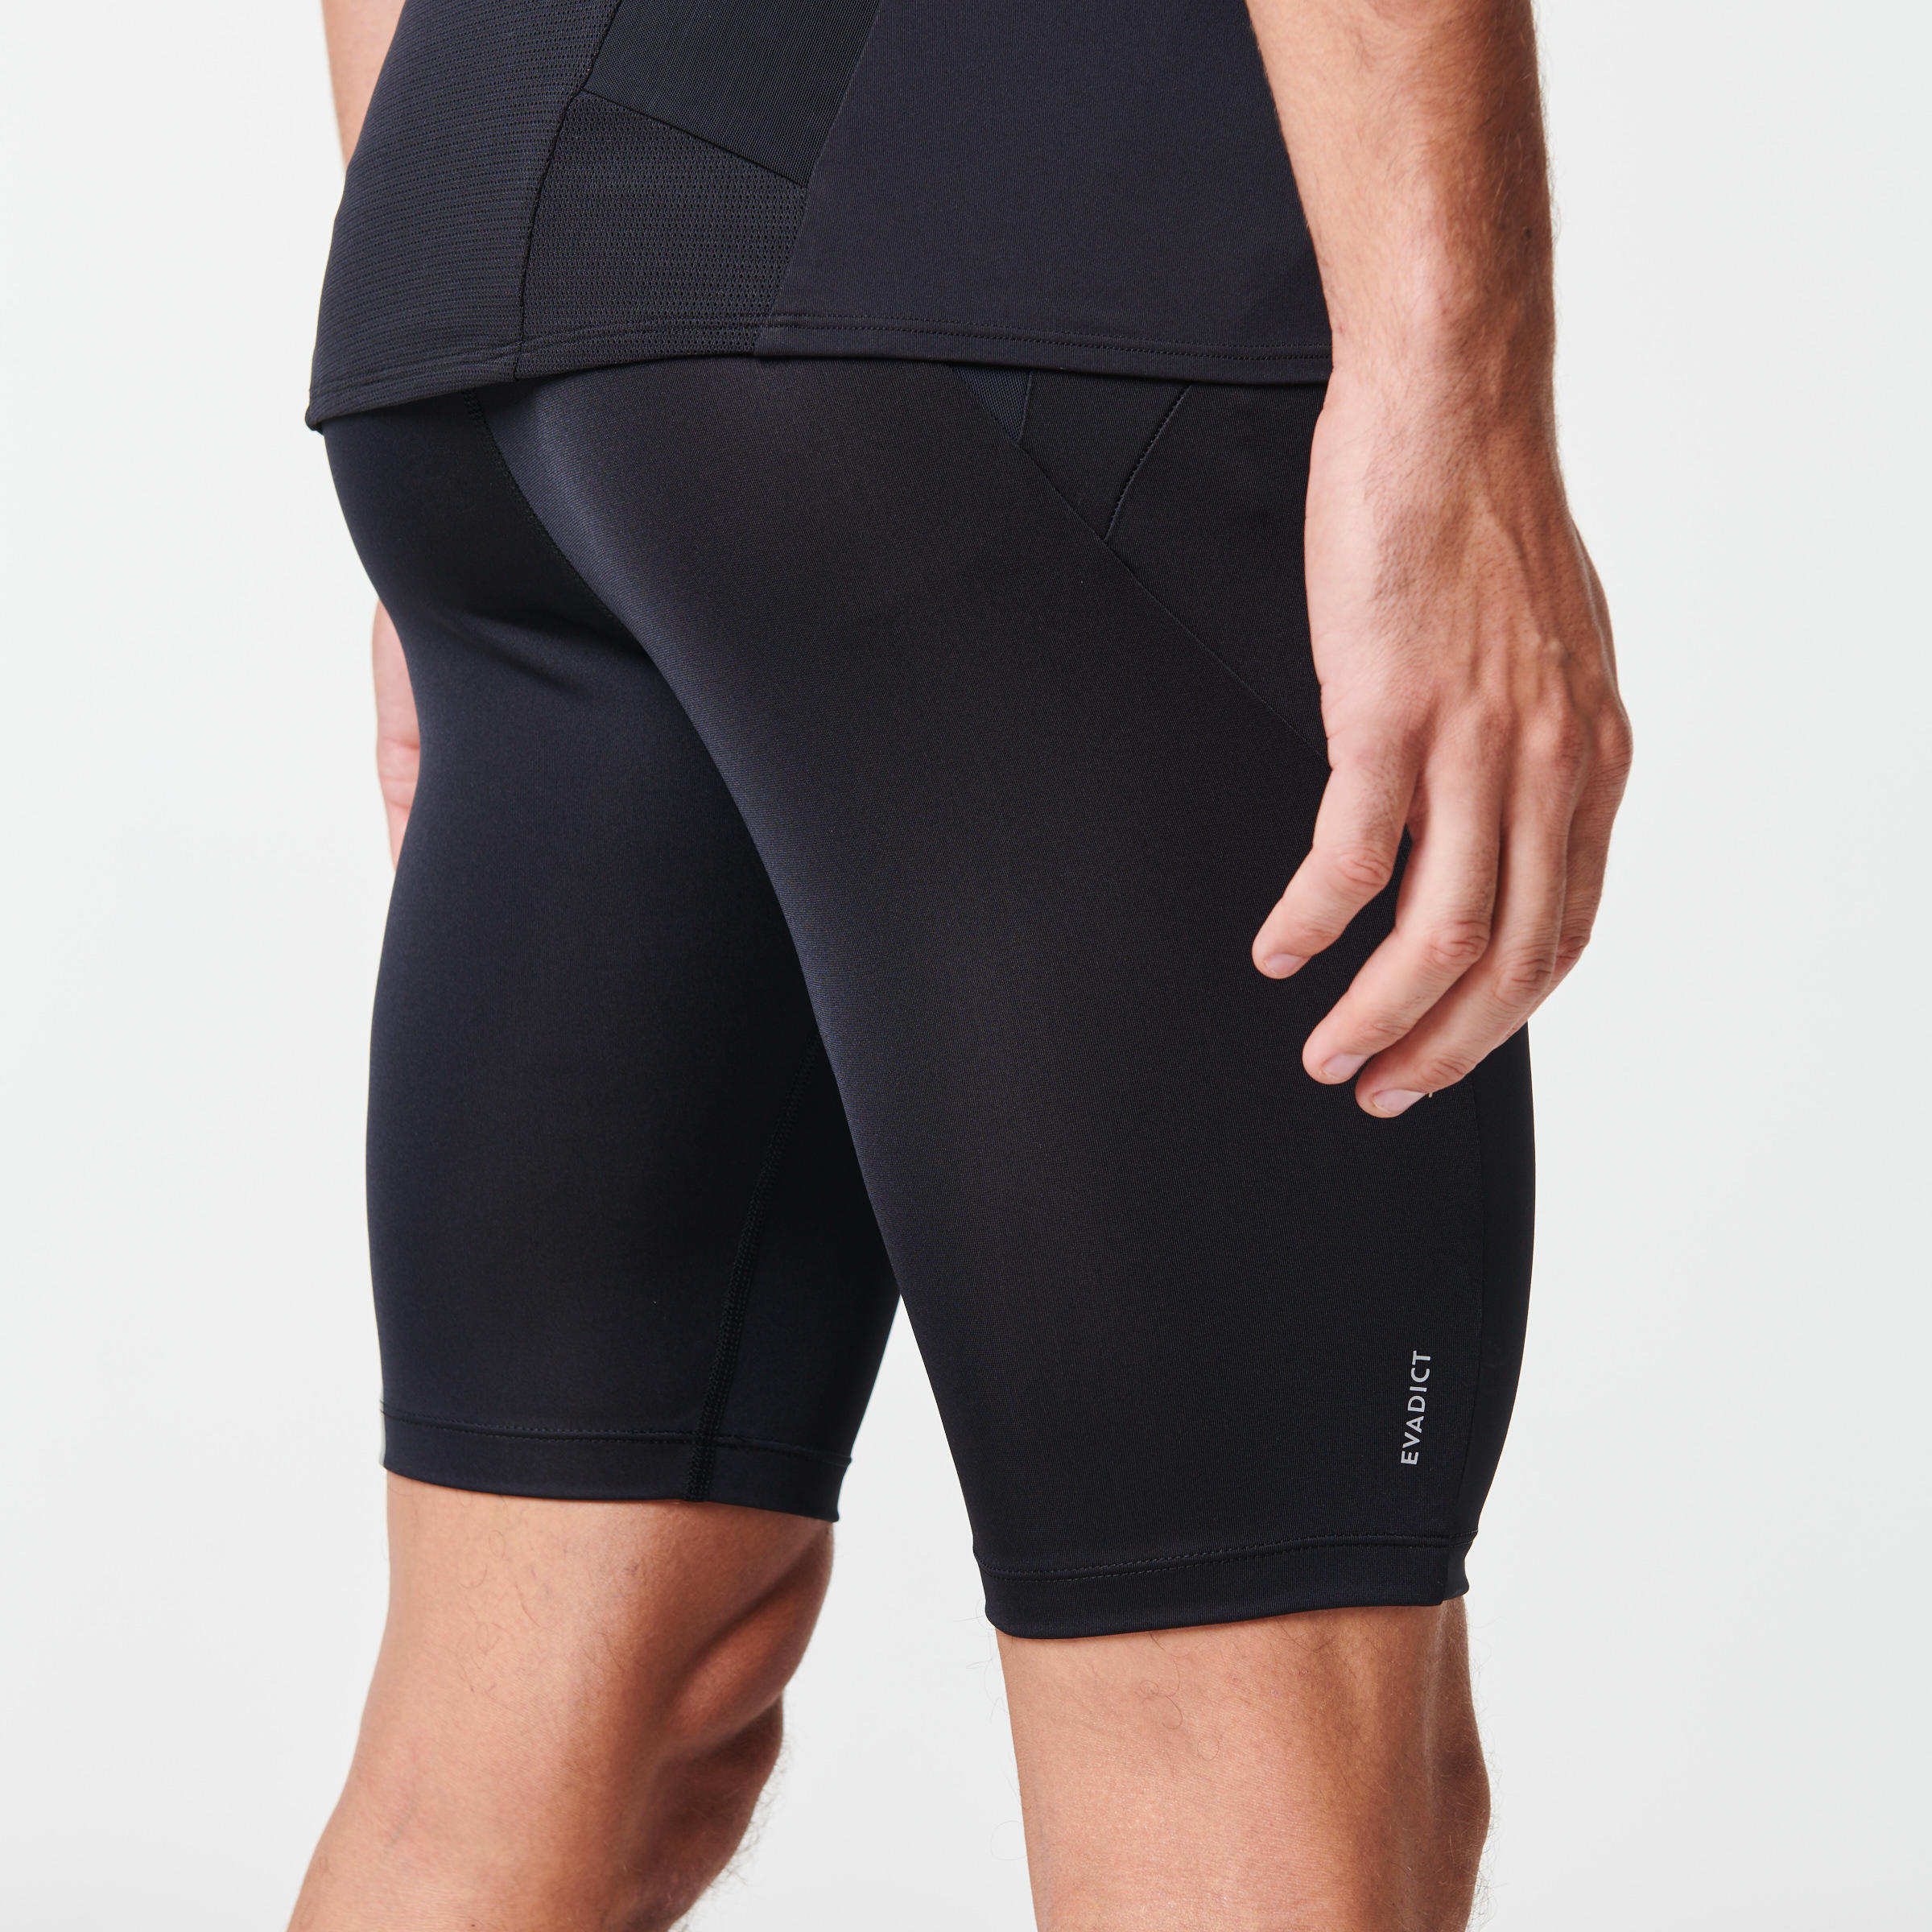 Tight Trial Running Shorts South Africa 